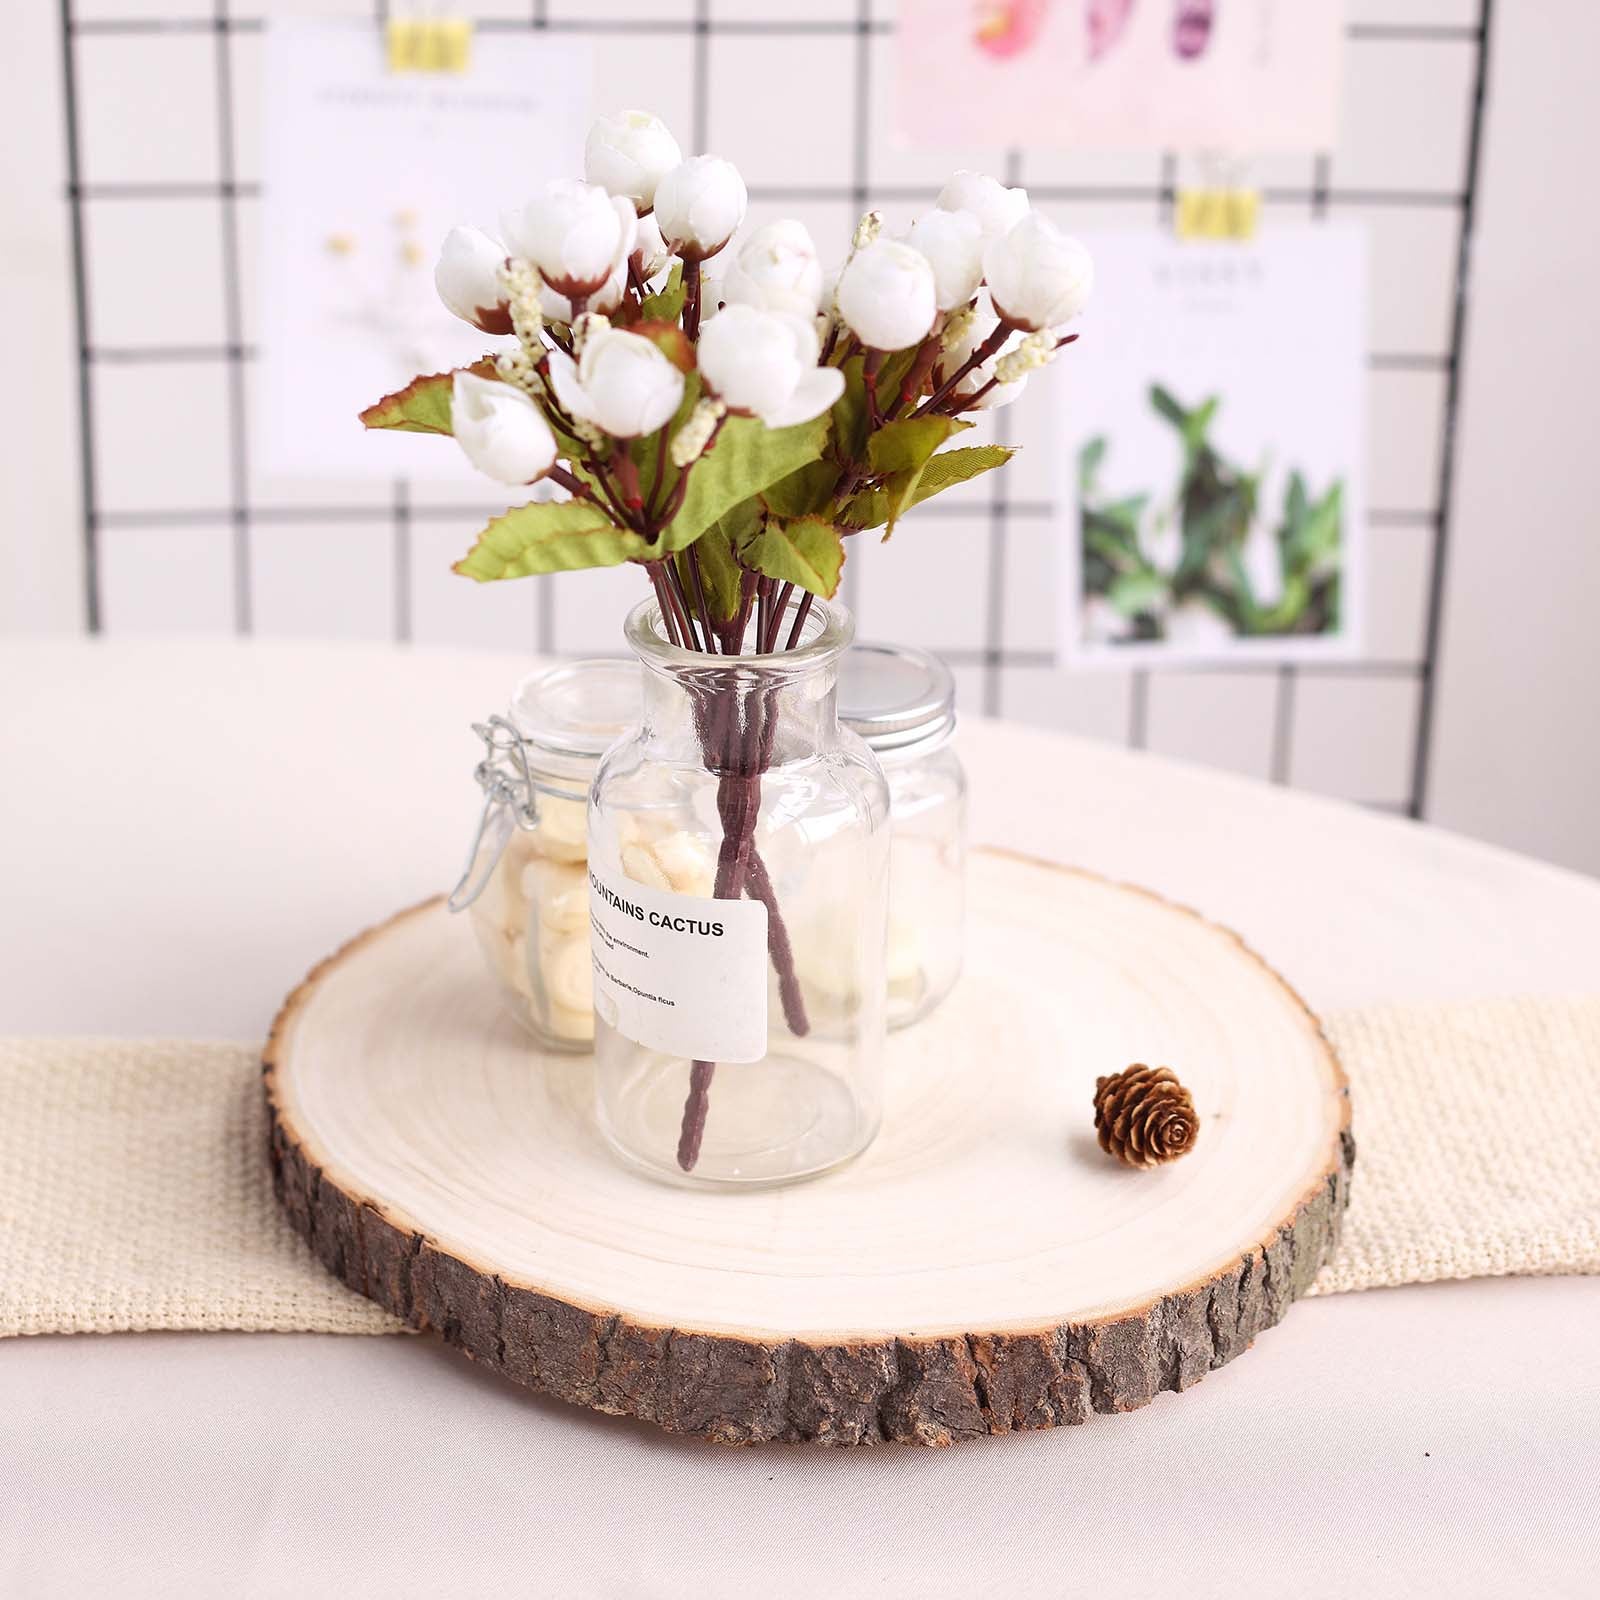 12 Dia | Rustic Natural Wood Slices Round Poplar Wooden Slab Table Centerpiece